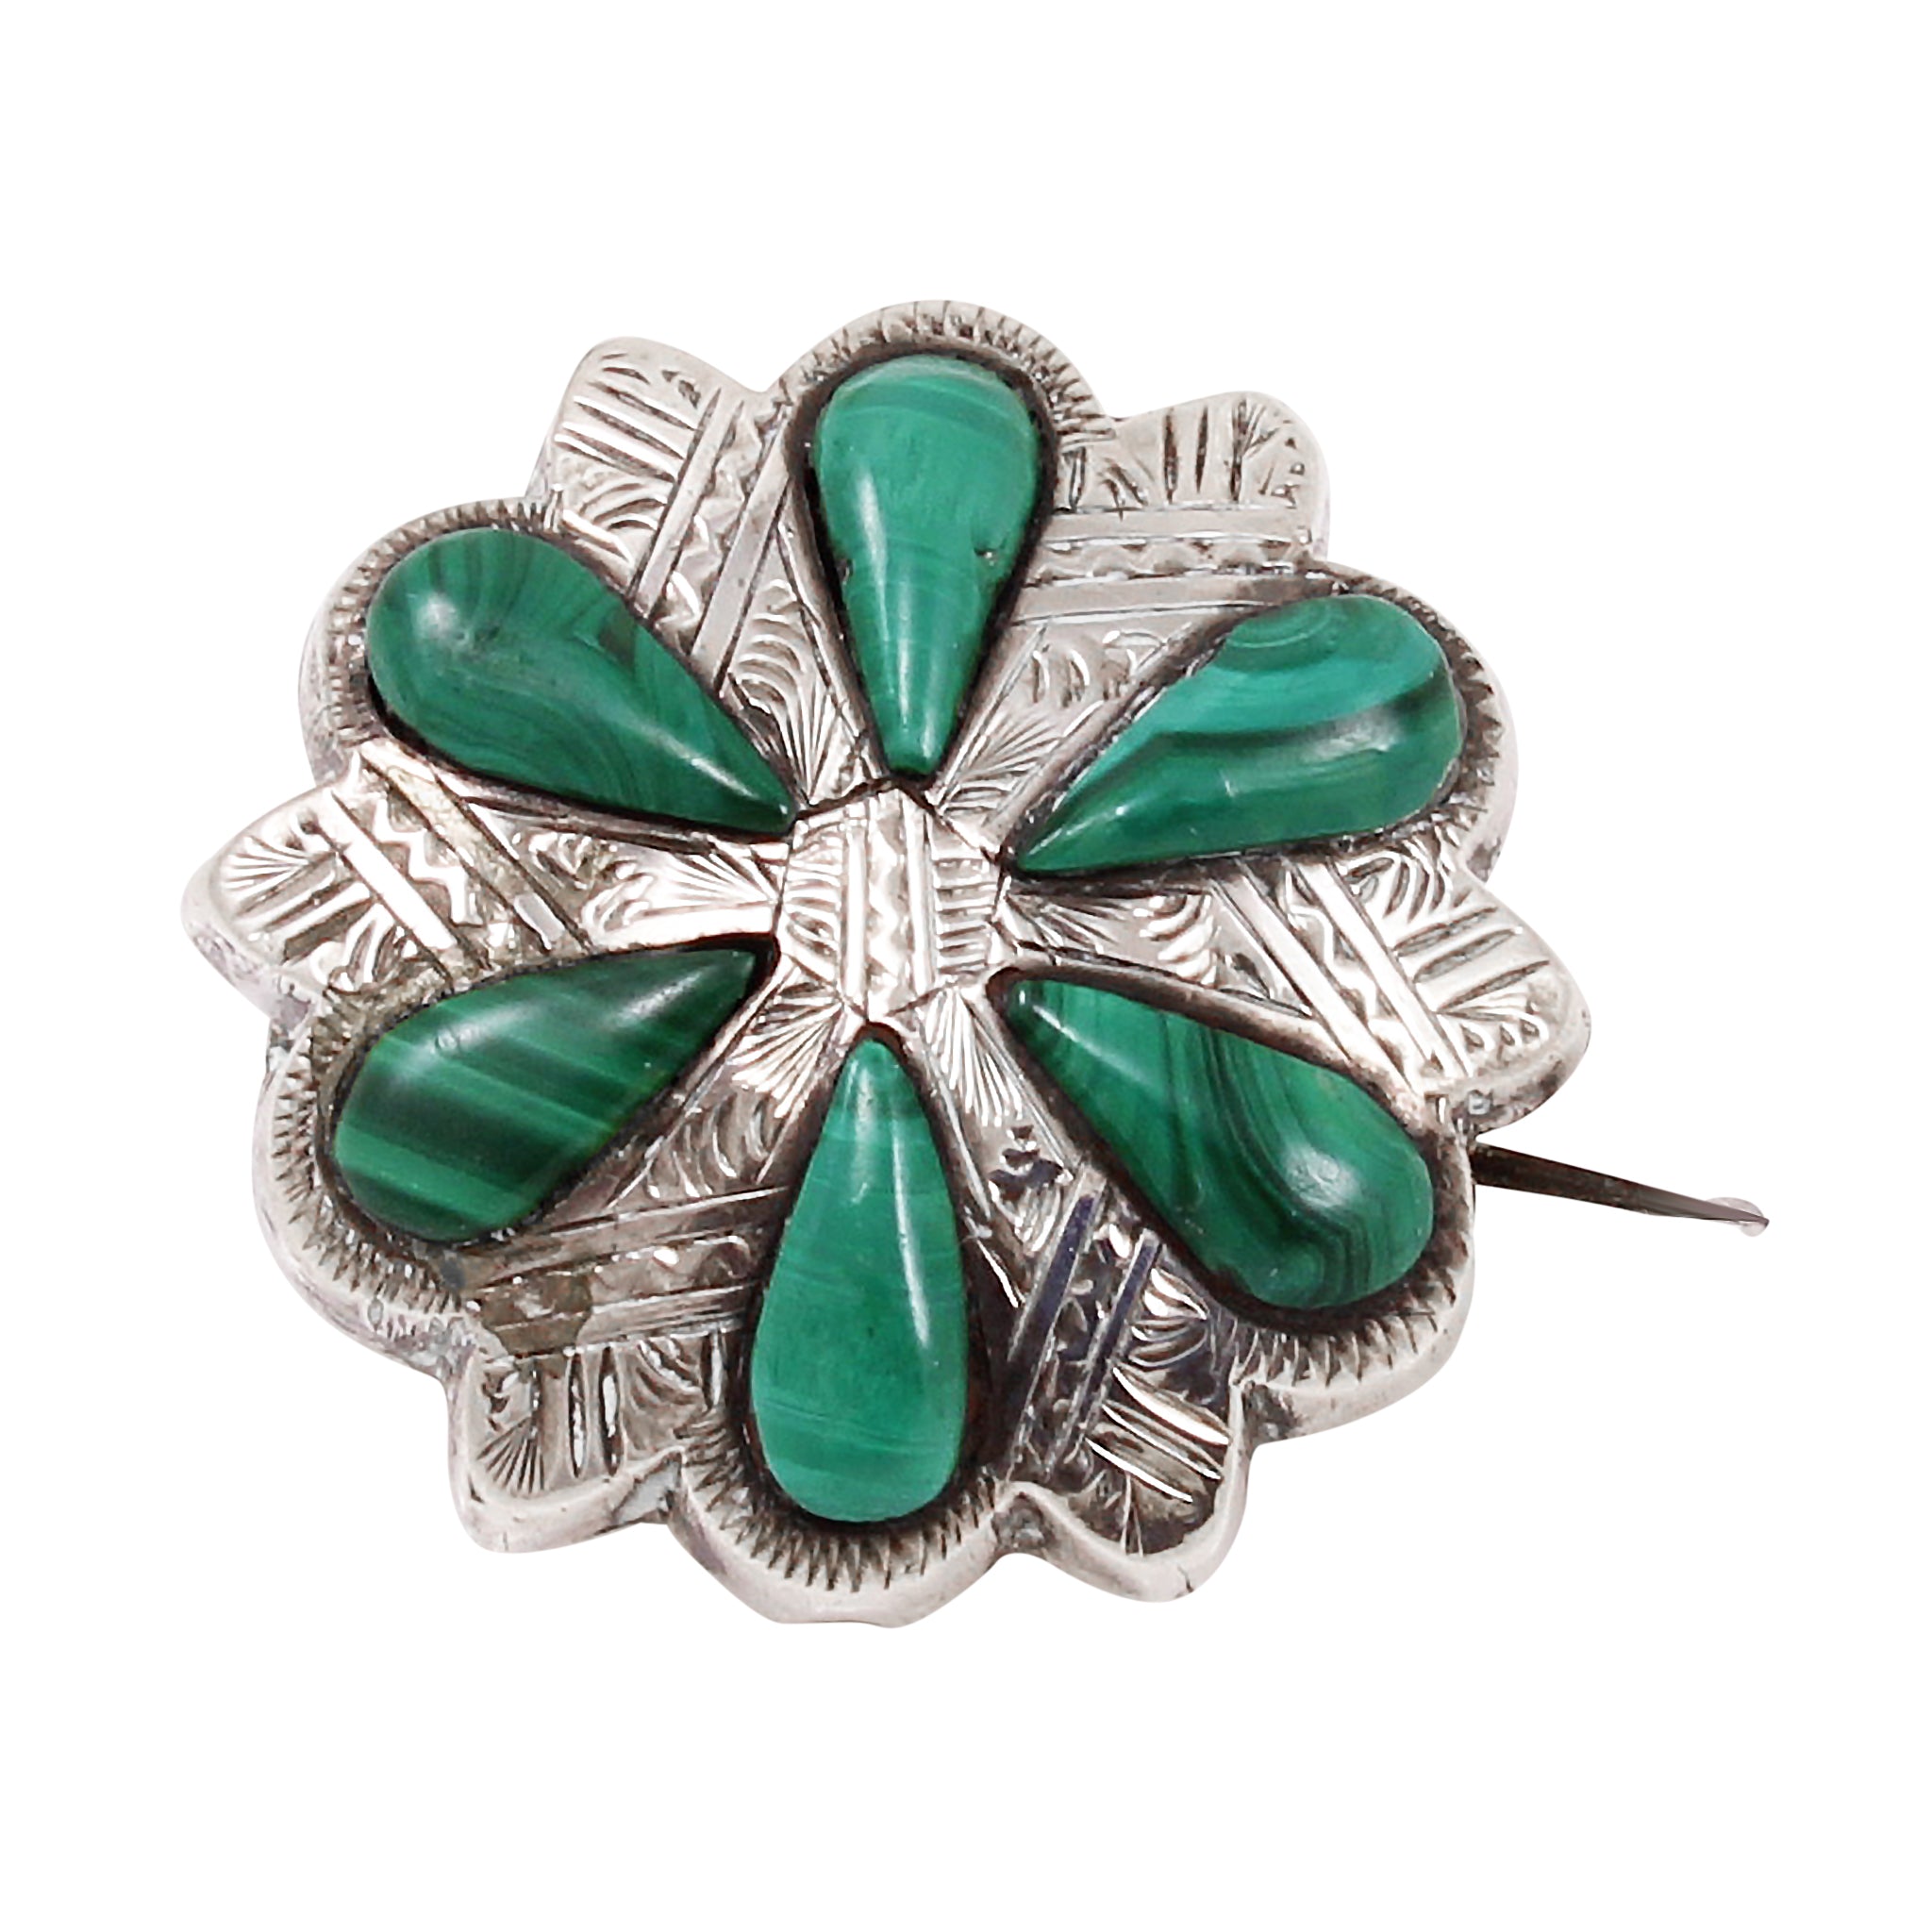 Victorian Scottish Pebble Malachite and Sterling Pin Front